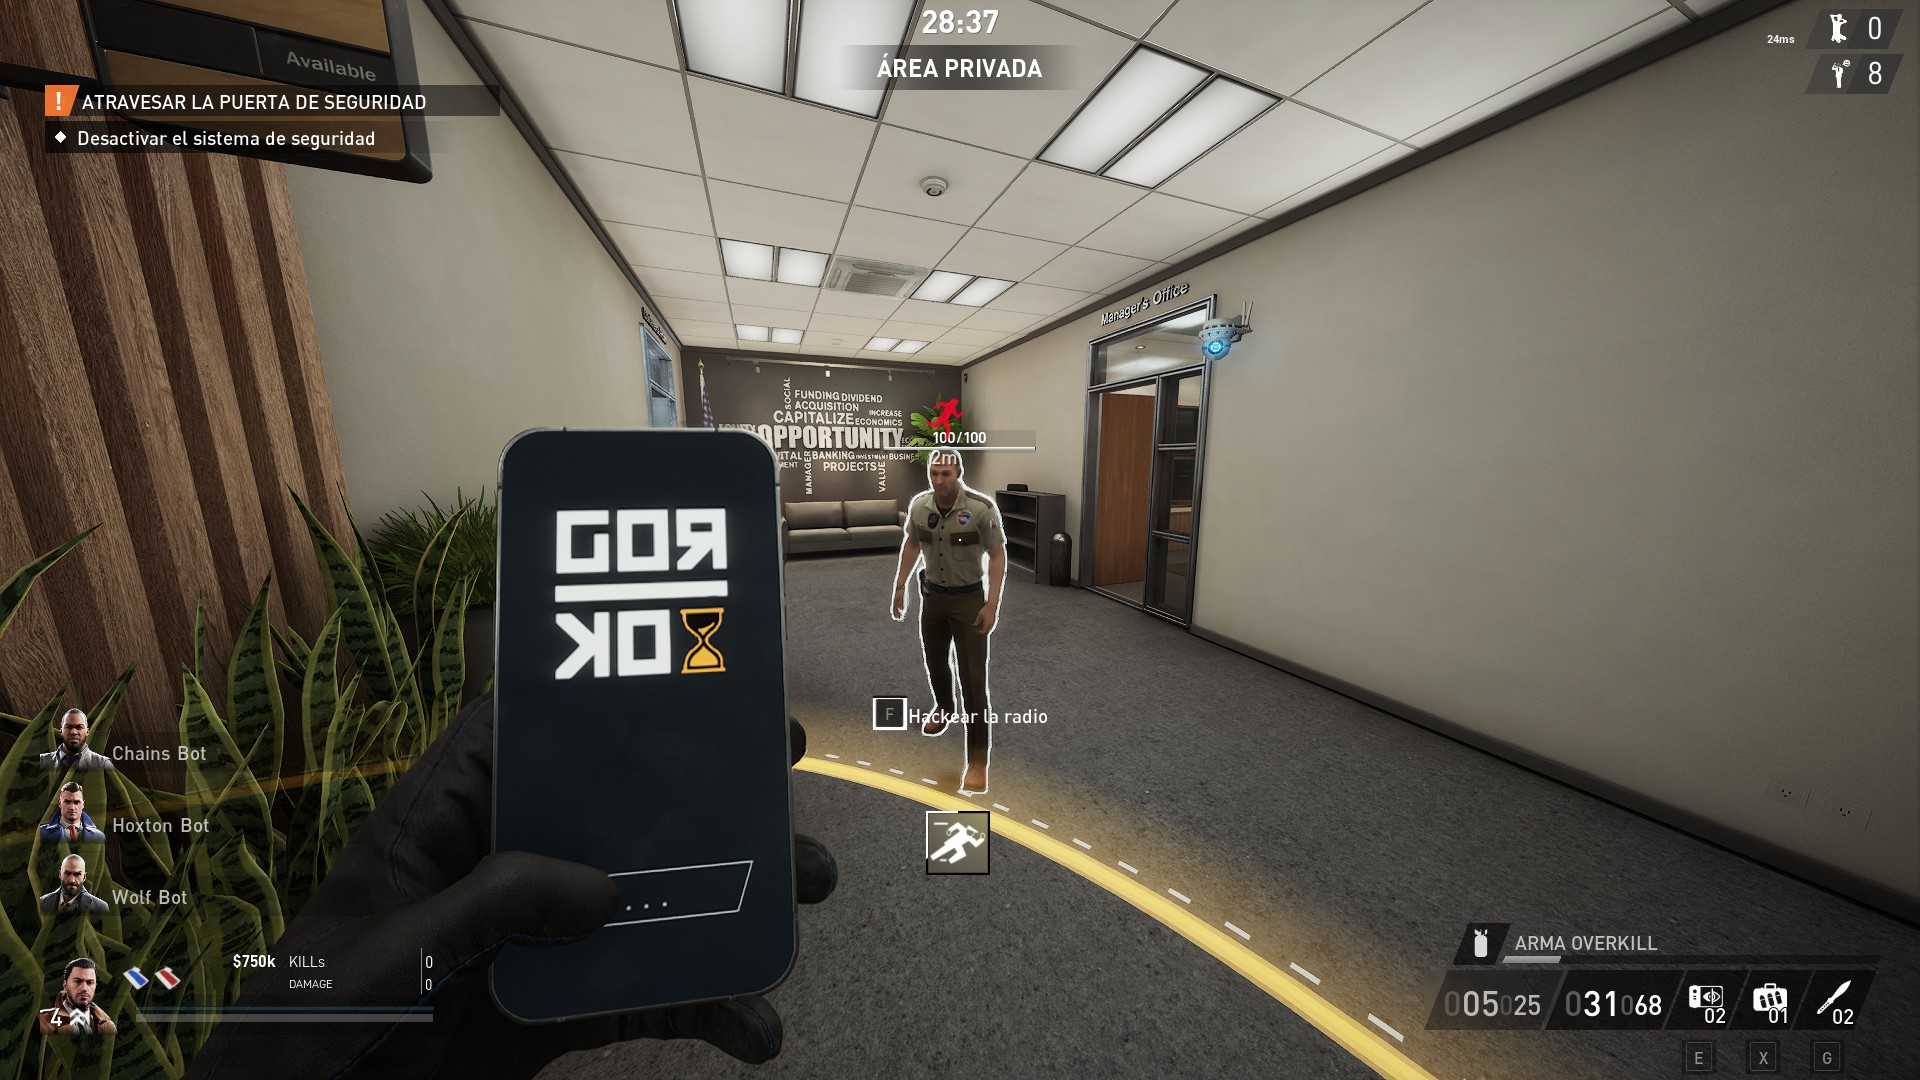 Payday 3 dev “extremely sorry” for delaying major patch